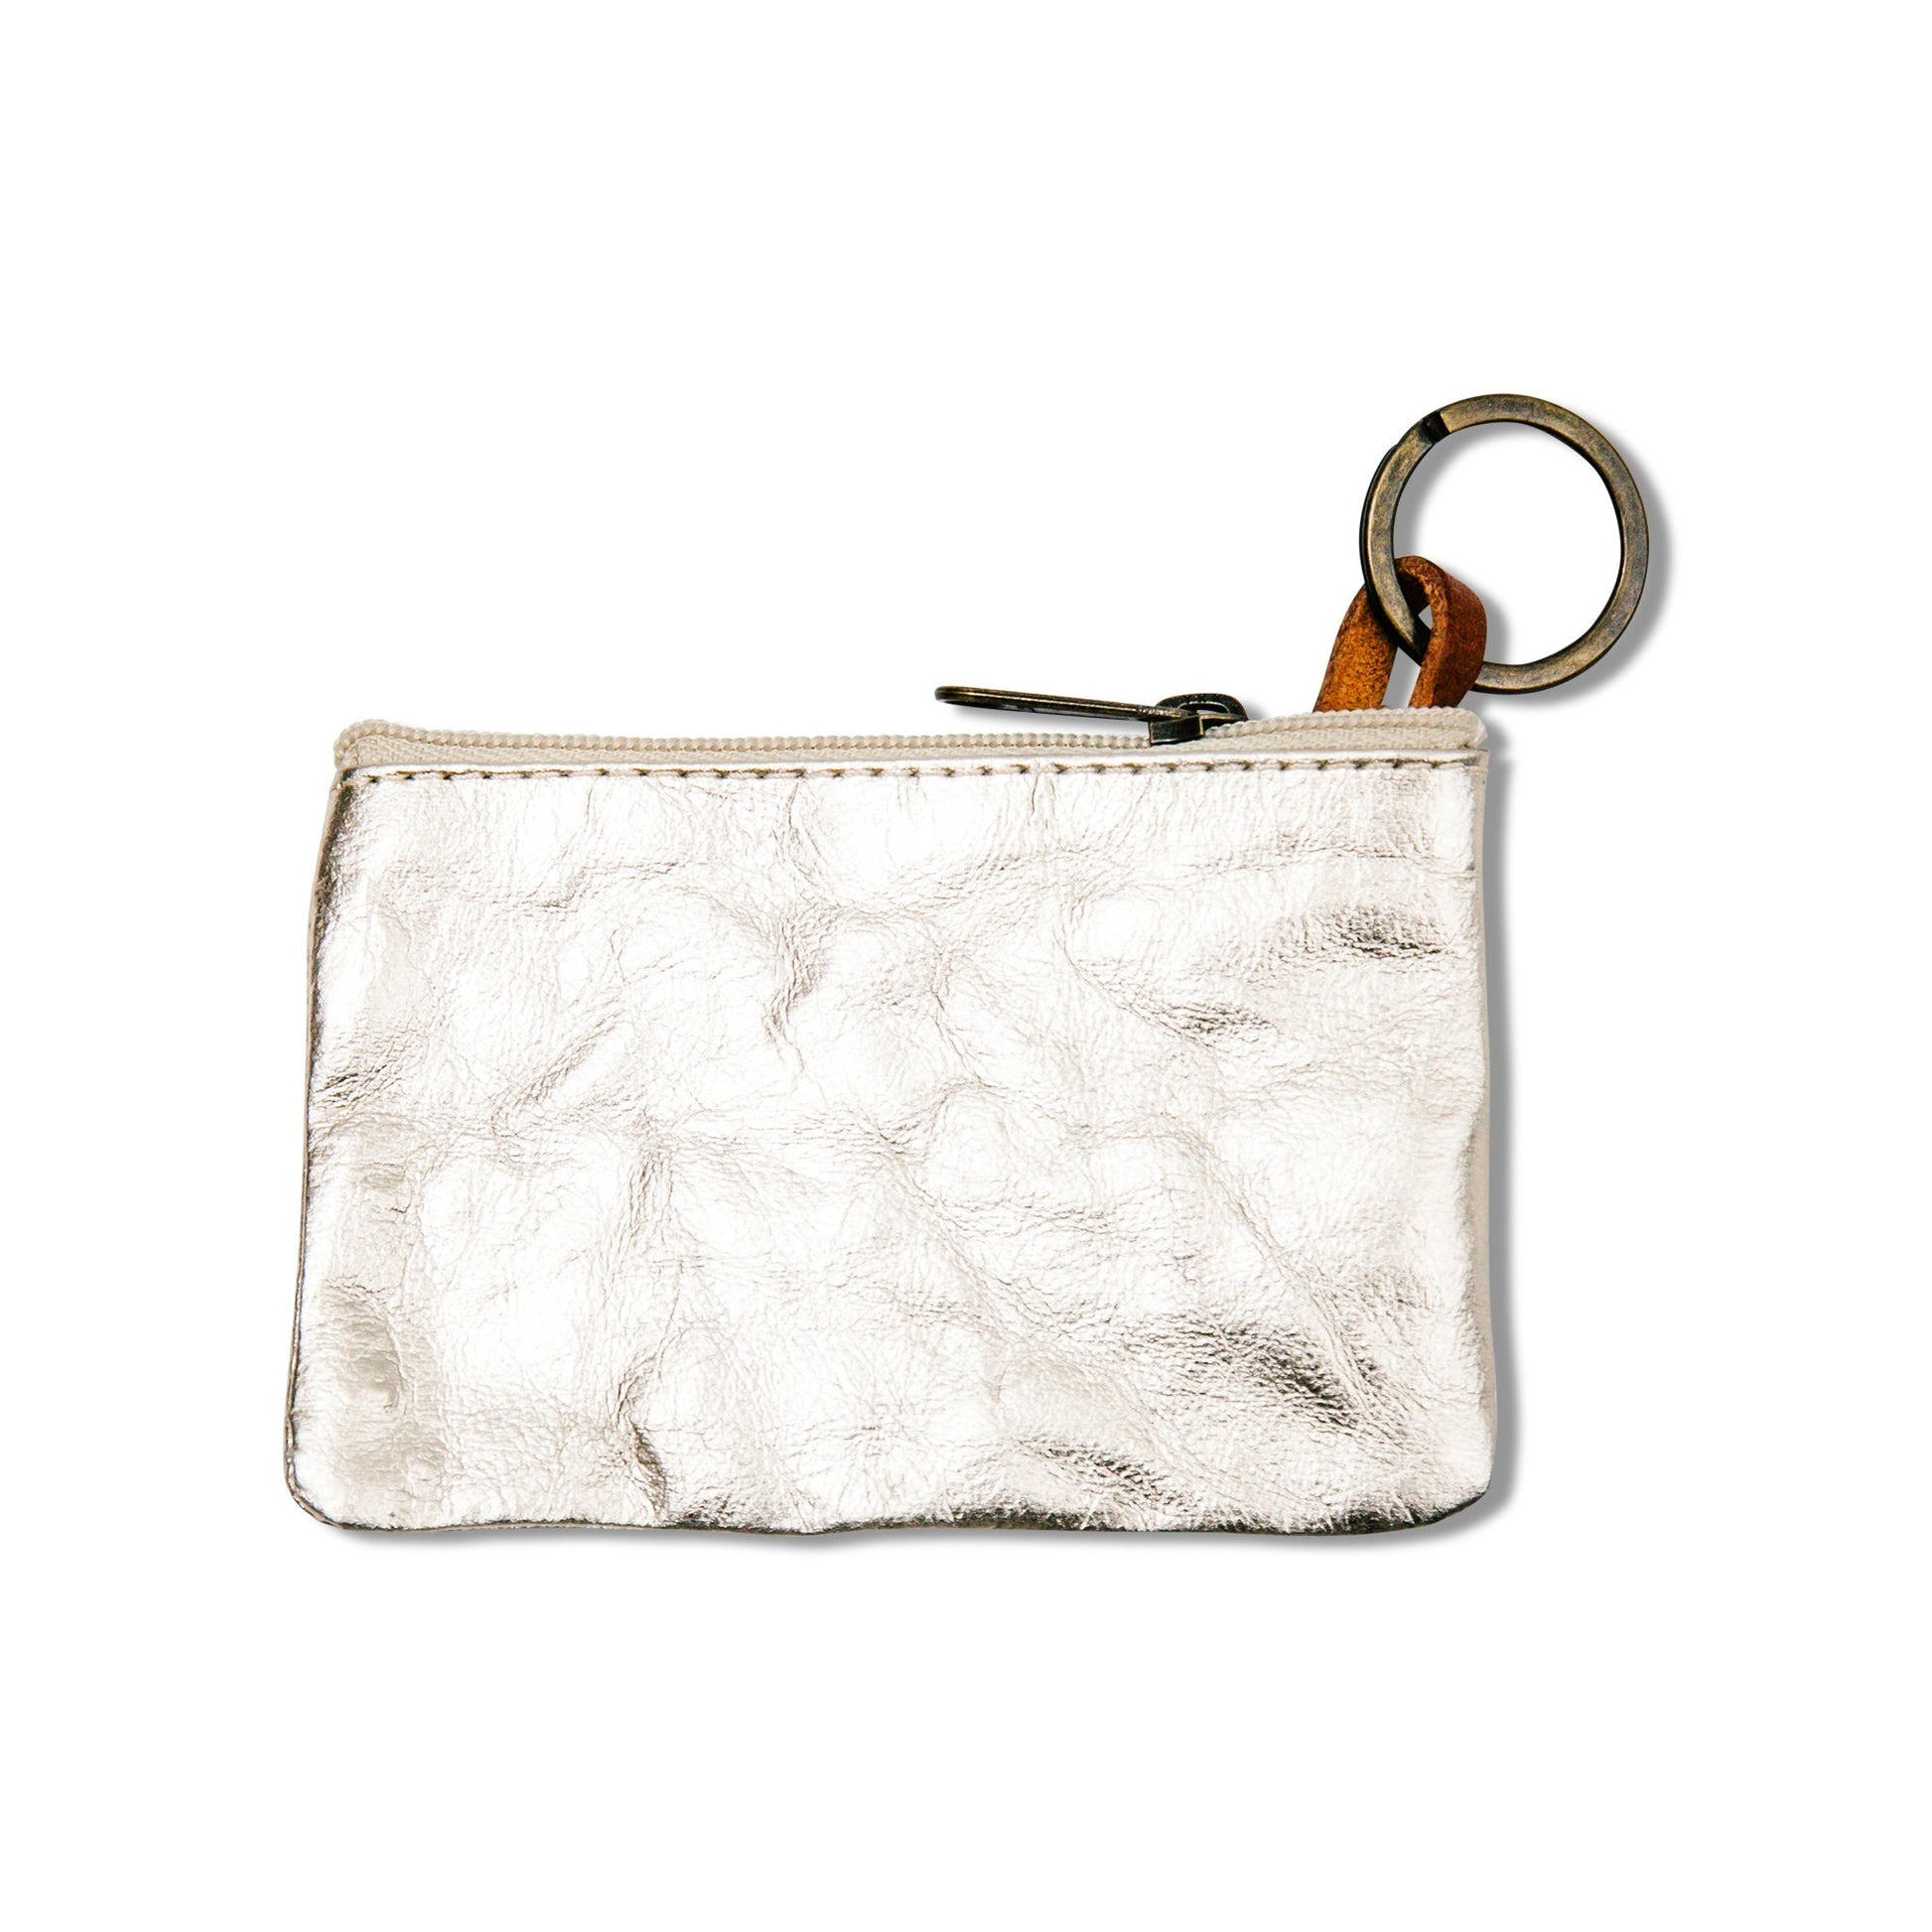 A silver metallic washable paper small pouch is shown with a keyring attachment and zip closure.